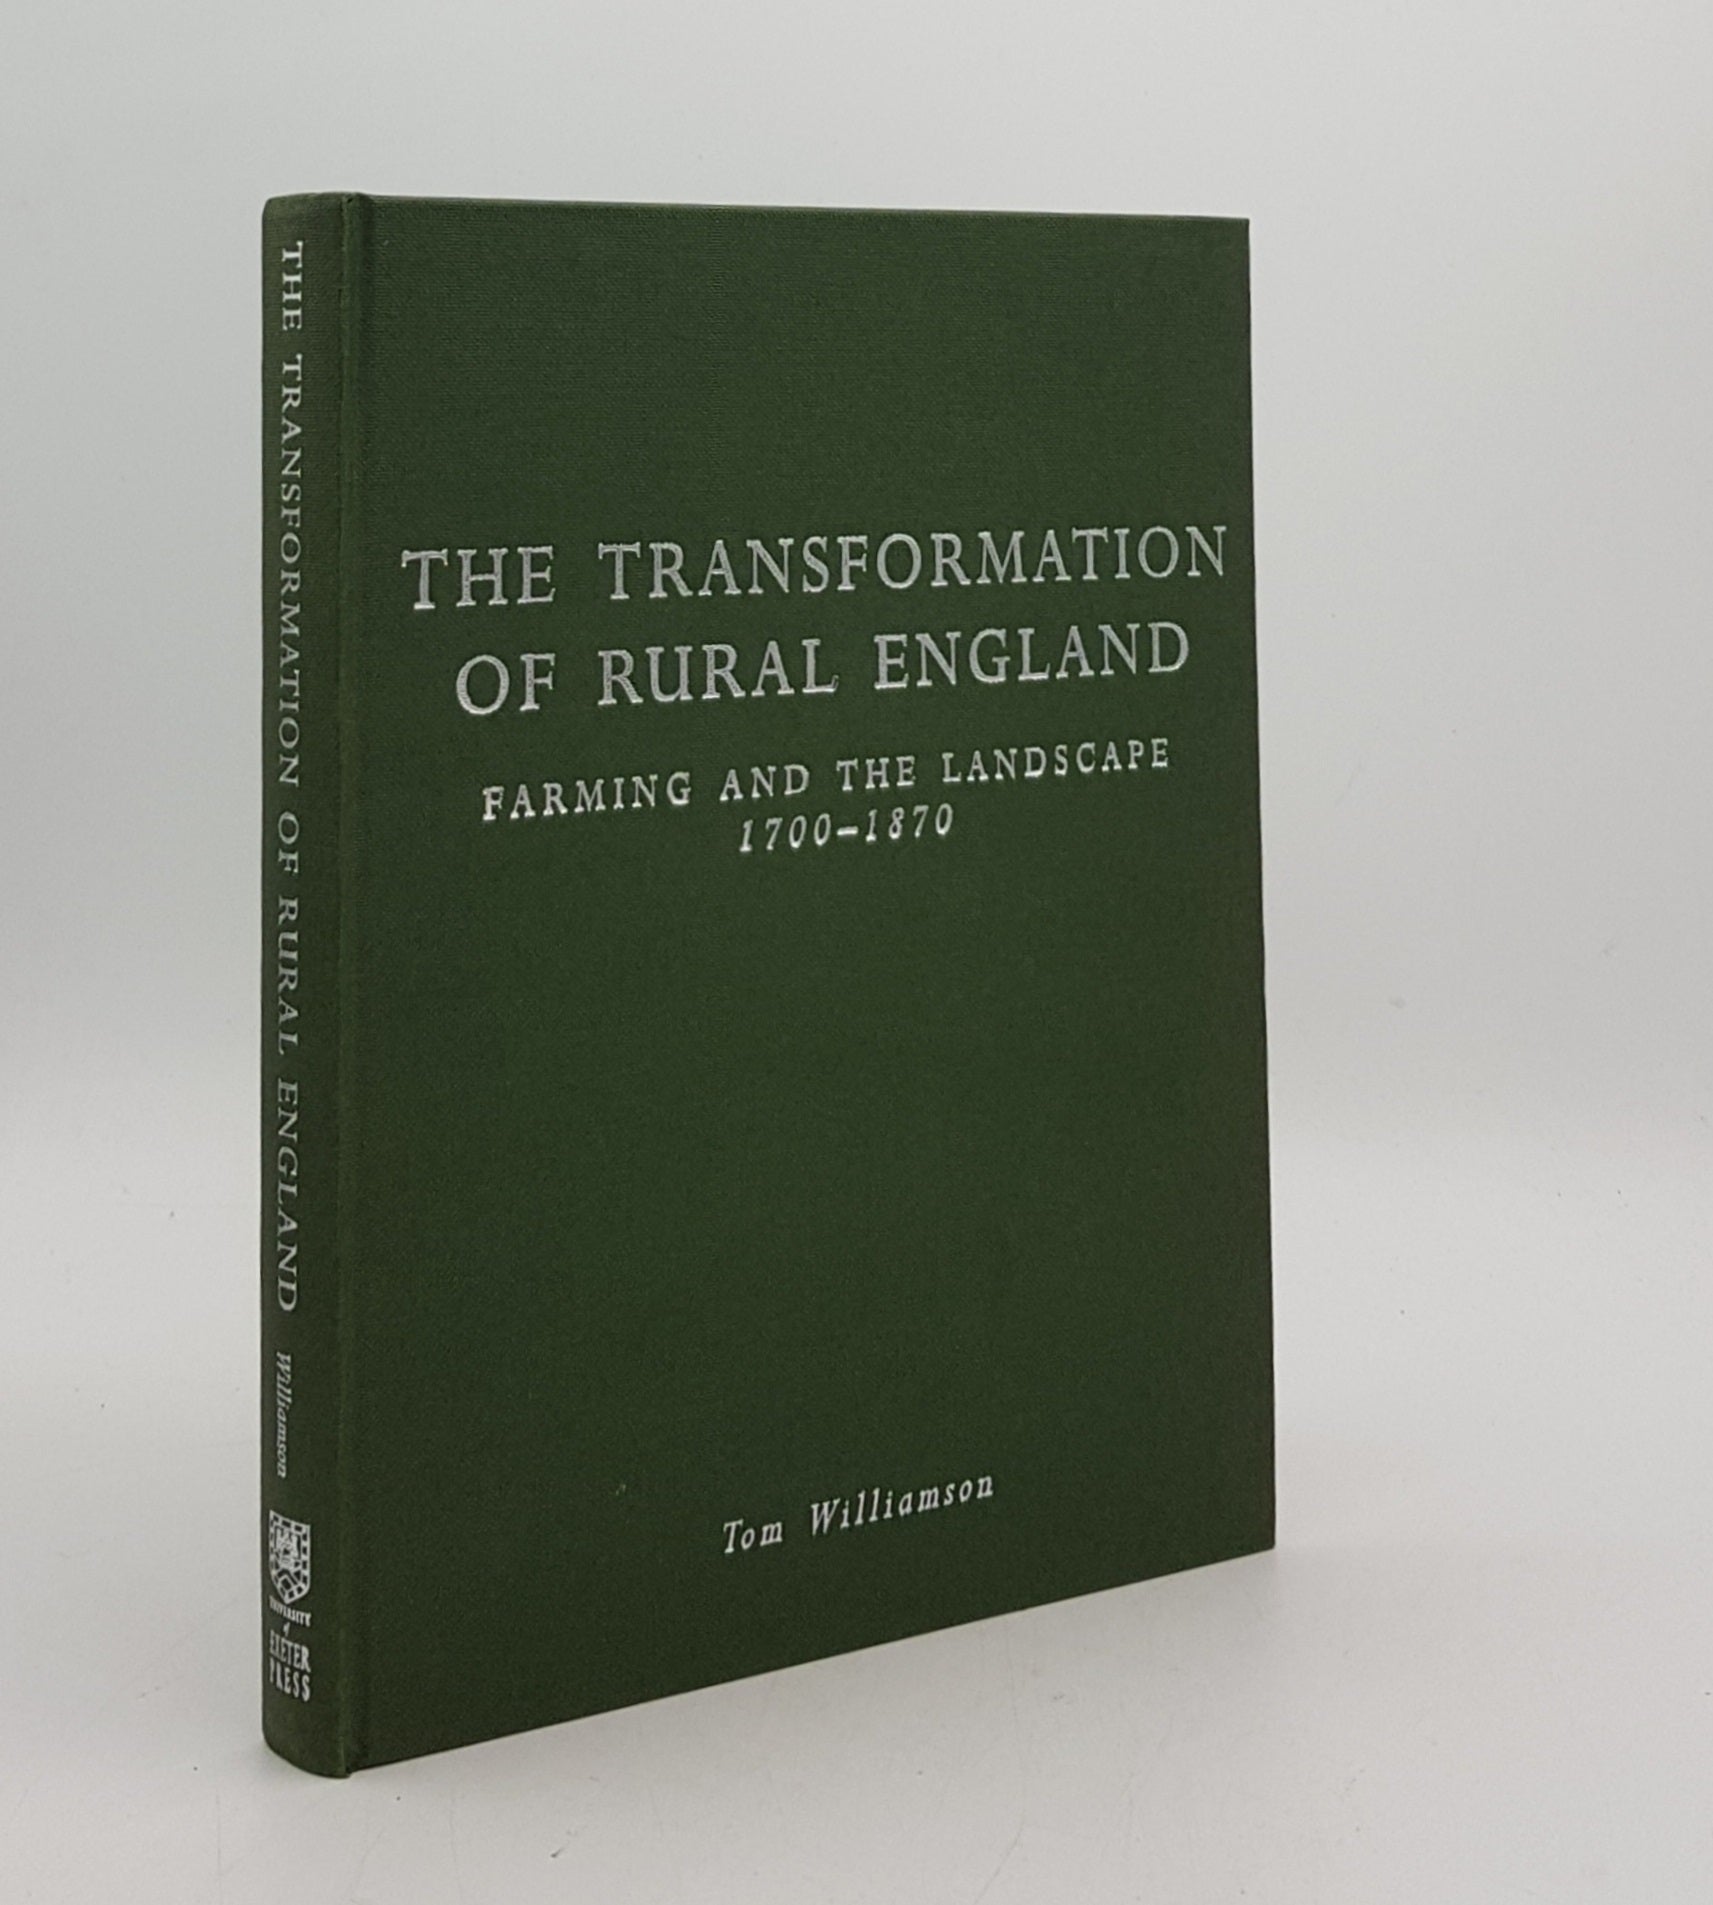 WILLIAMSON Tom - The Transformation of Rural England Farming and the Landscape 1700-1870